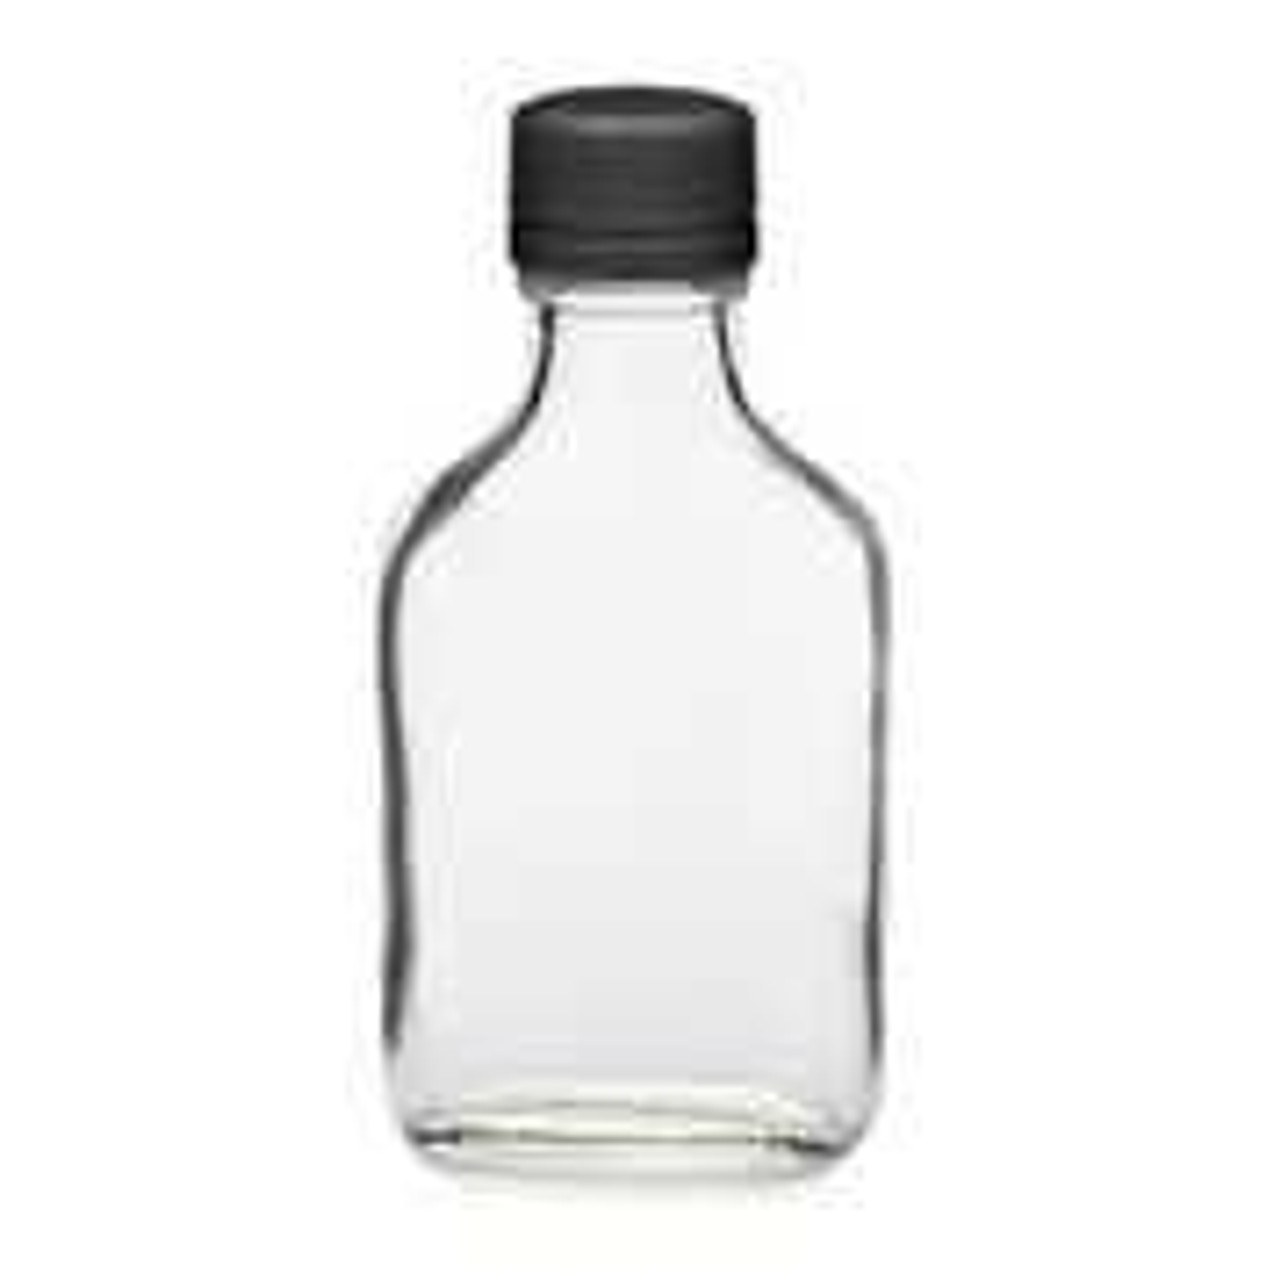 https://cdn11.bigcommerce.com/s-1ybtx/images/stencil/1280x1280/products/727/5906/100-ml-Flask-Glass-Bottle-with-Tamper-Evident-Cap_2165__84794.1674161112.jpg?c=2?imbypass=on